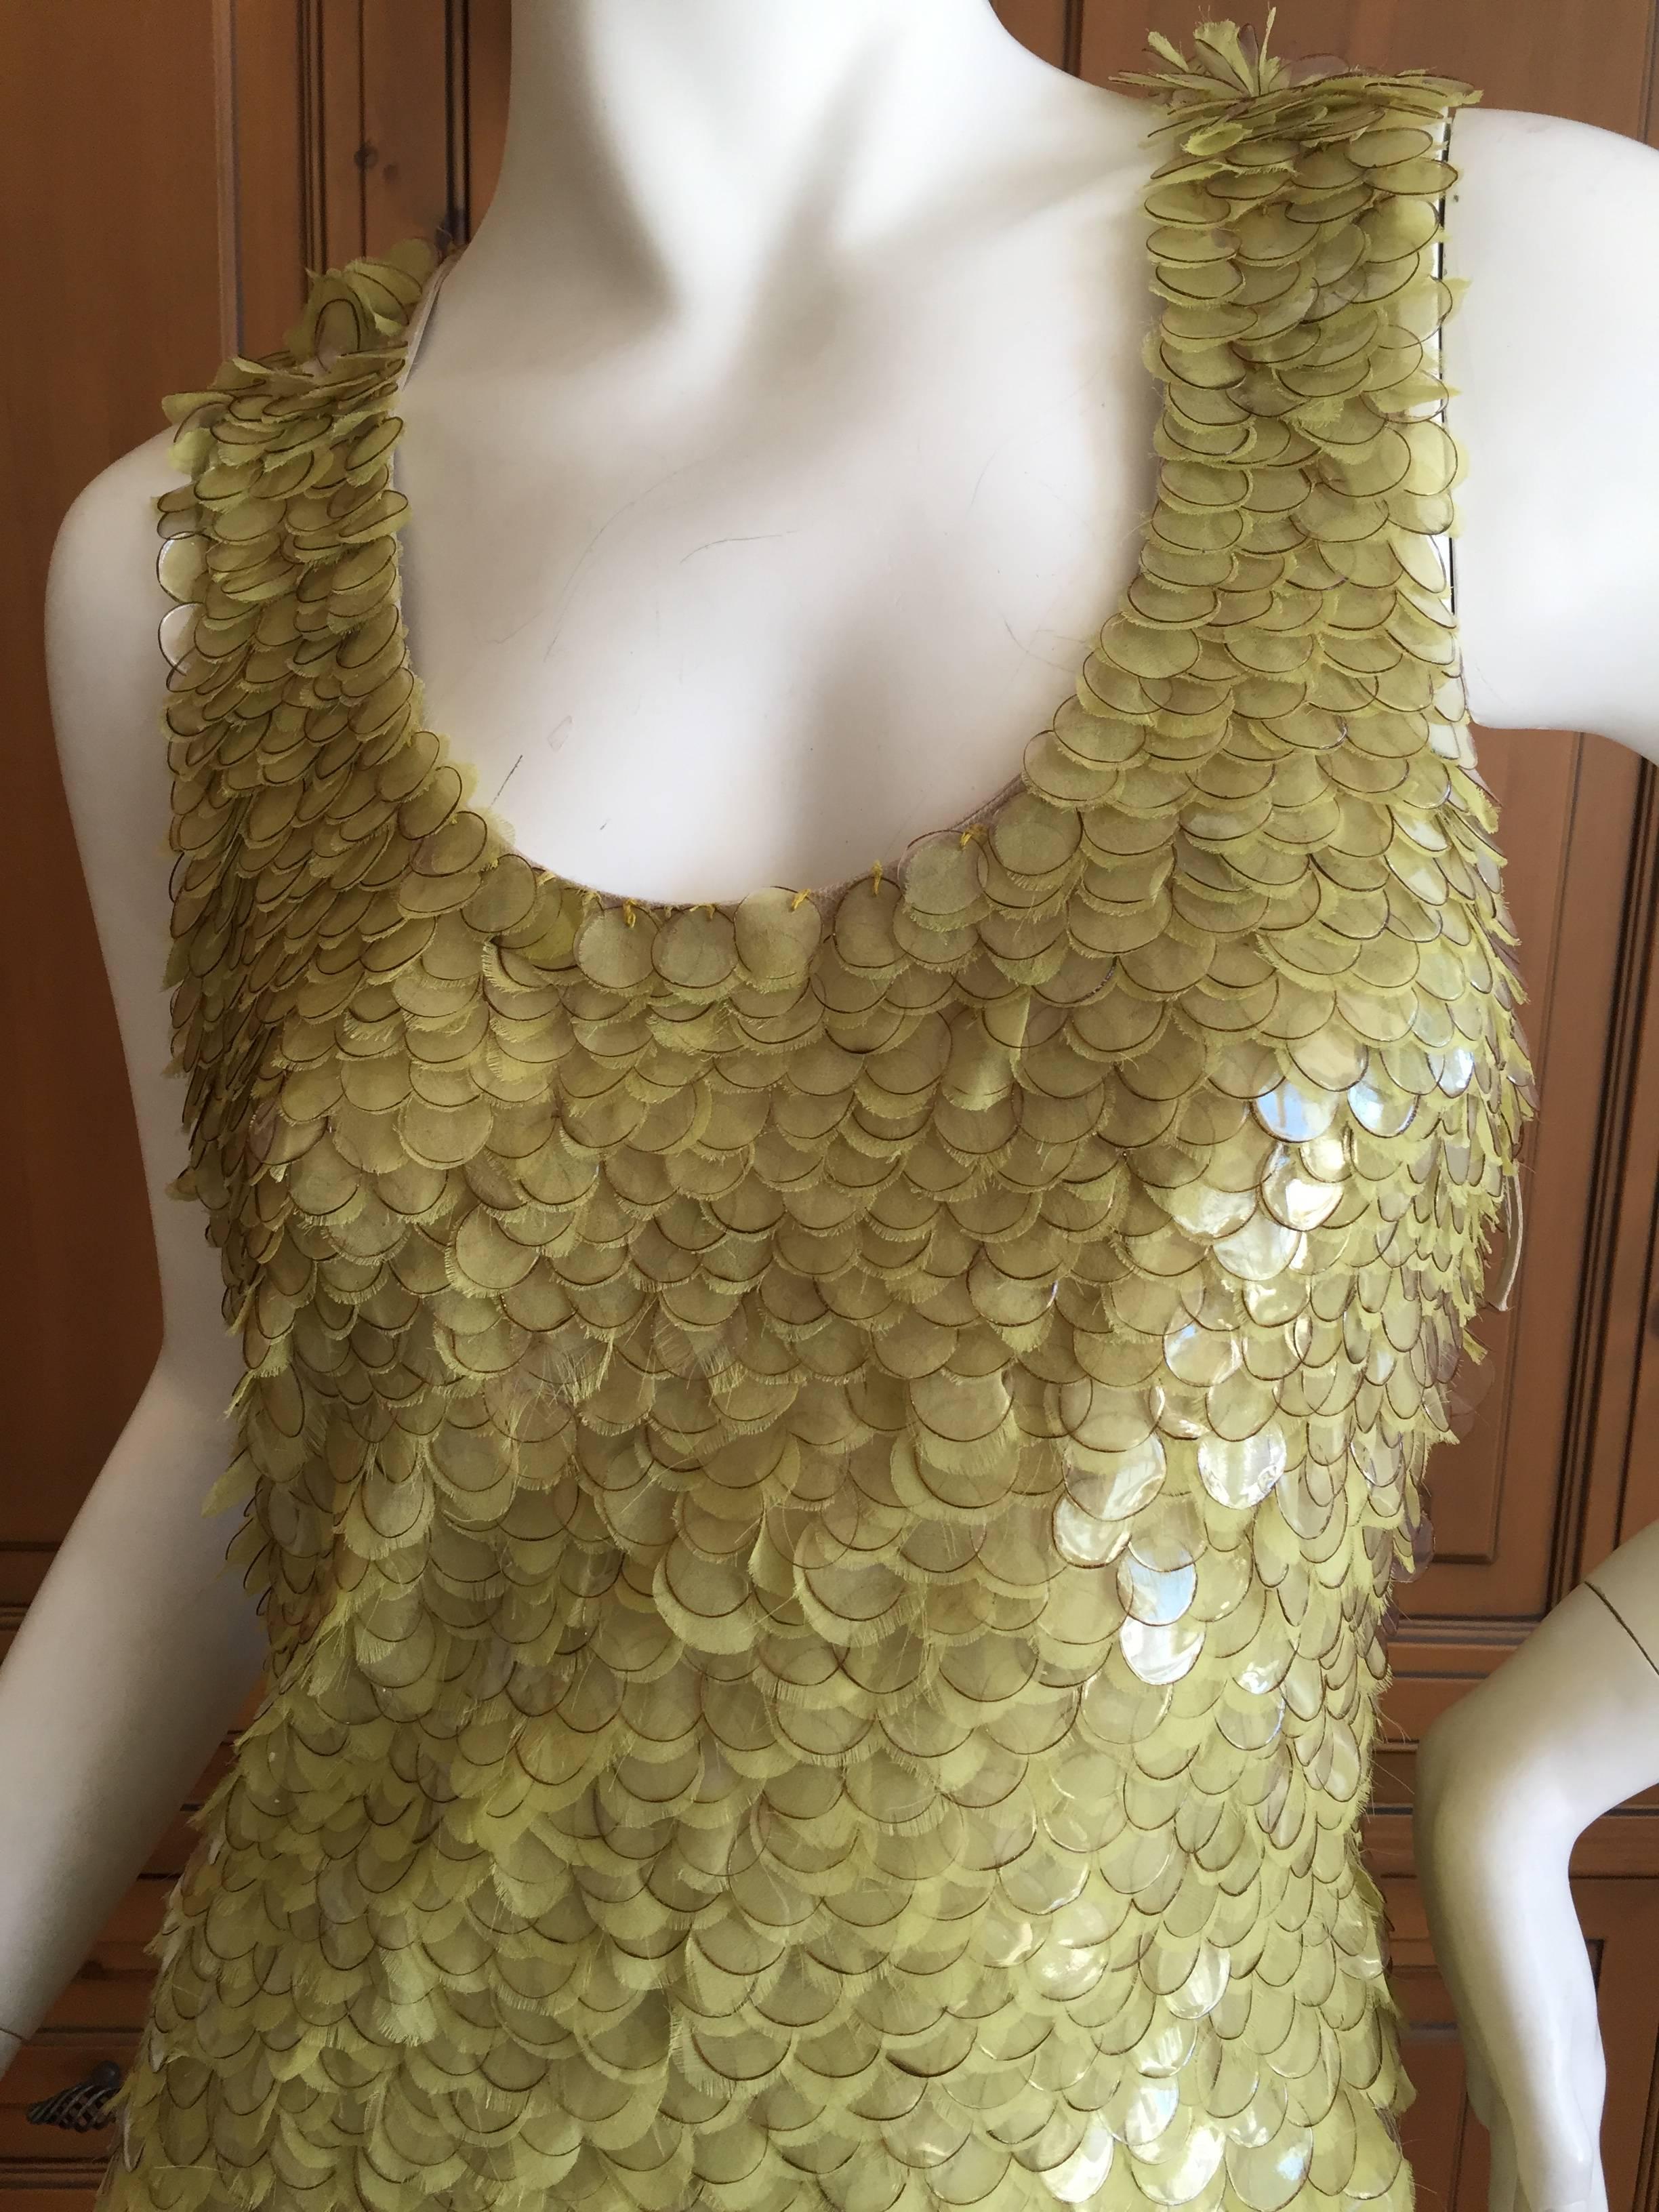 J. Mendel Exquisite Feathery Sequin Dress
Large sequins sewn with circle 